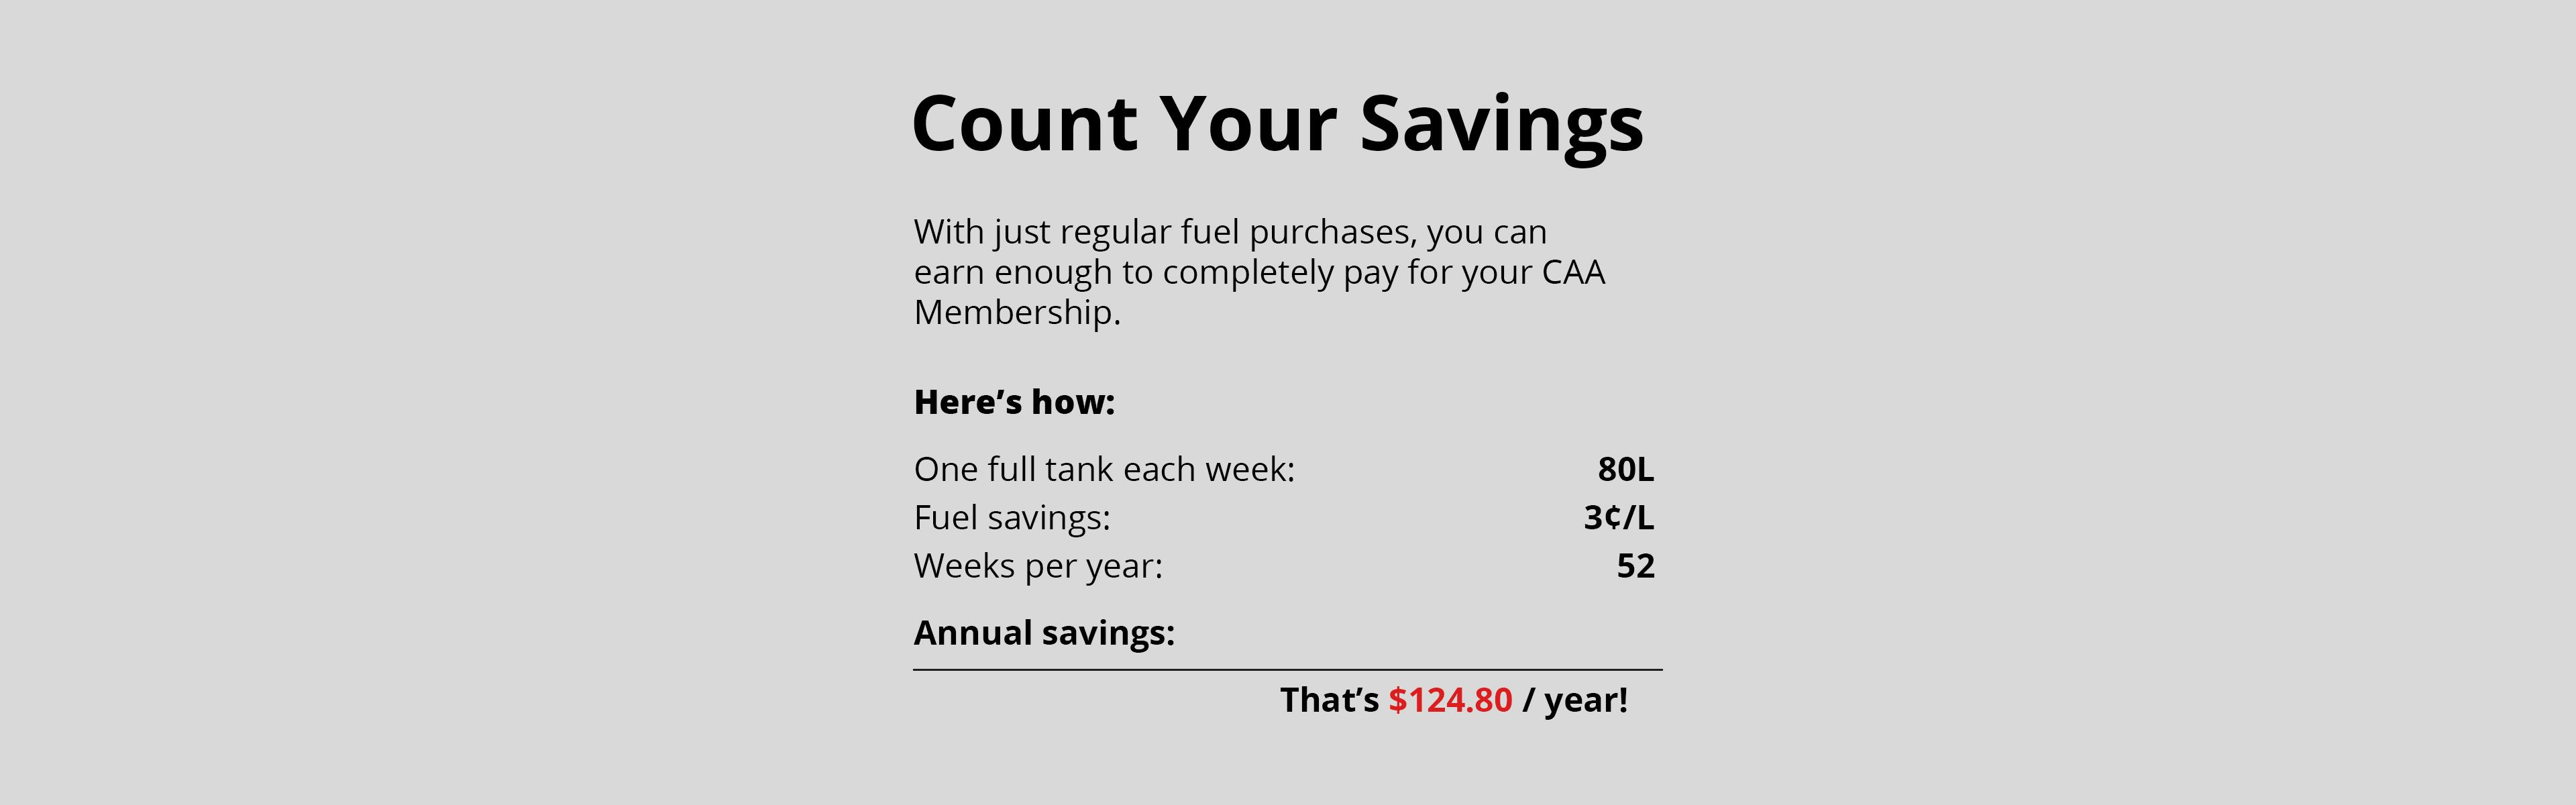 Count your savings at Shell